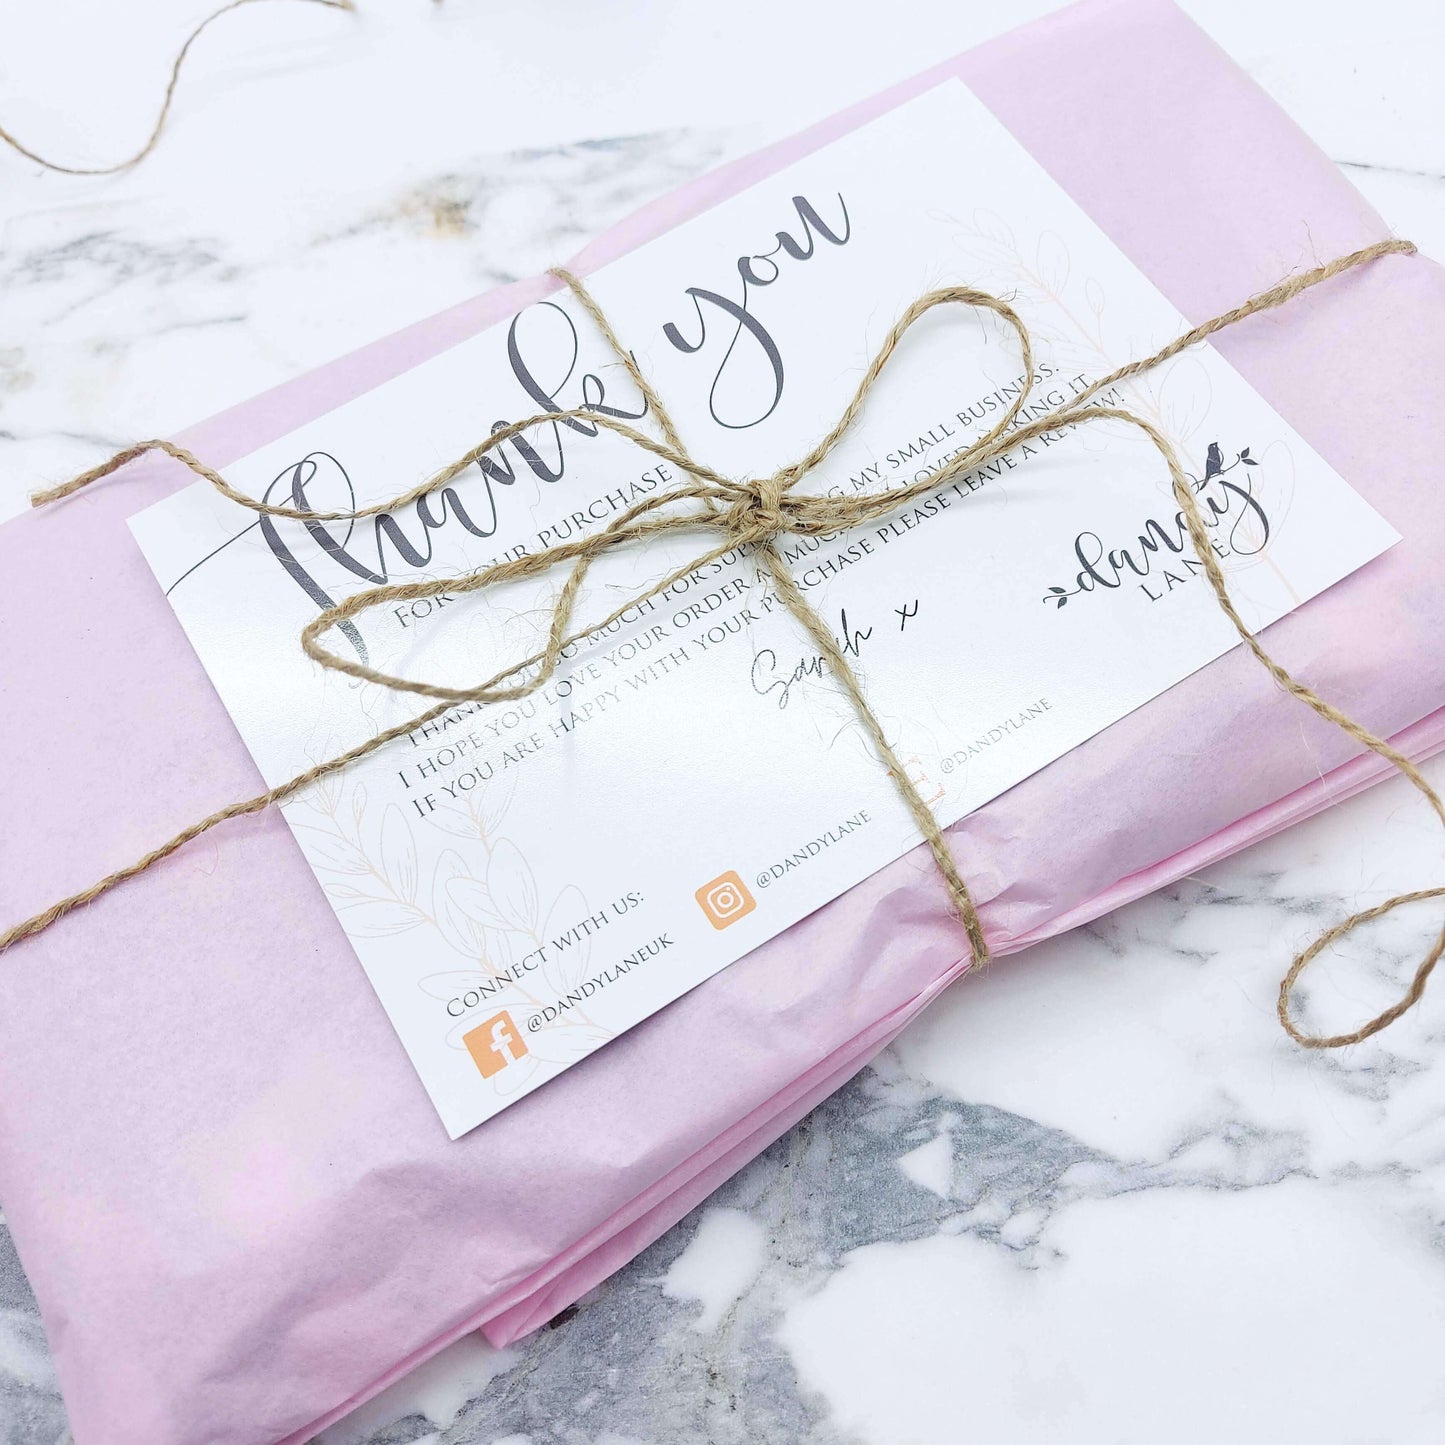 A fancy pink rectangle-shaped parcel, wrapped in pale pink tissue paper with a brown twine bow.